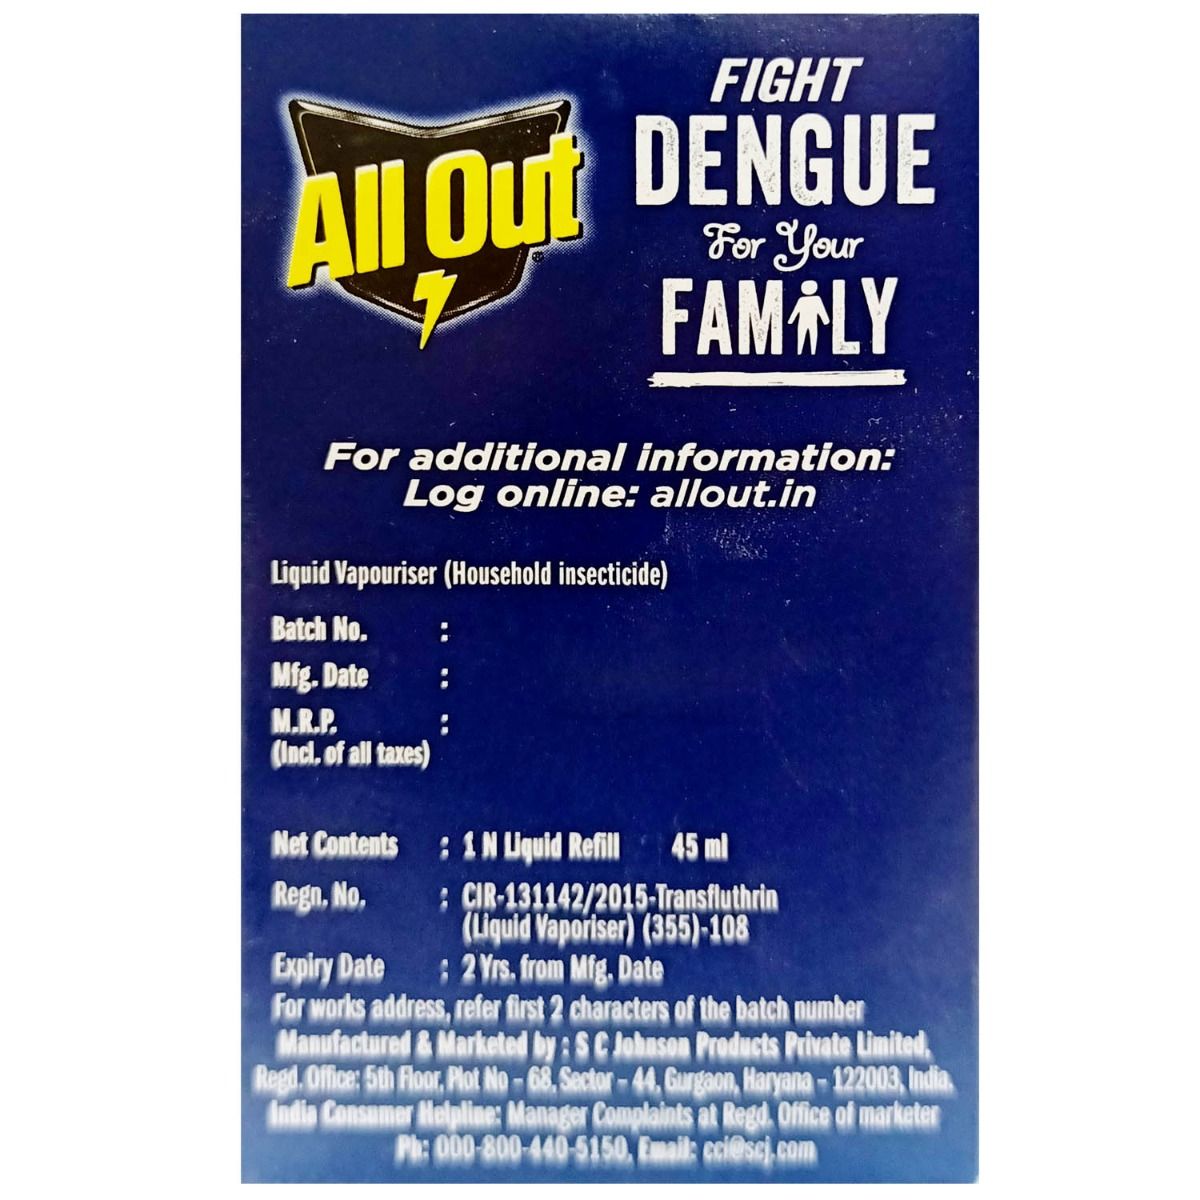 All Out Liquid Vaporizer 60 Nights Refill, 1 Count, Pack of 1 